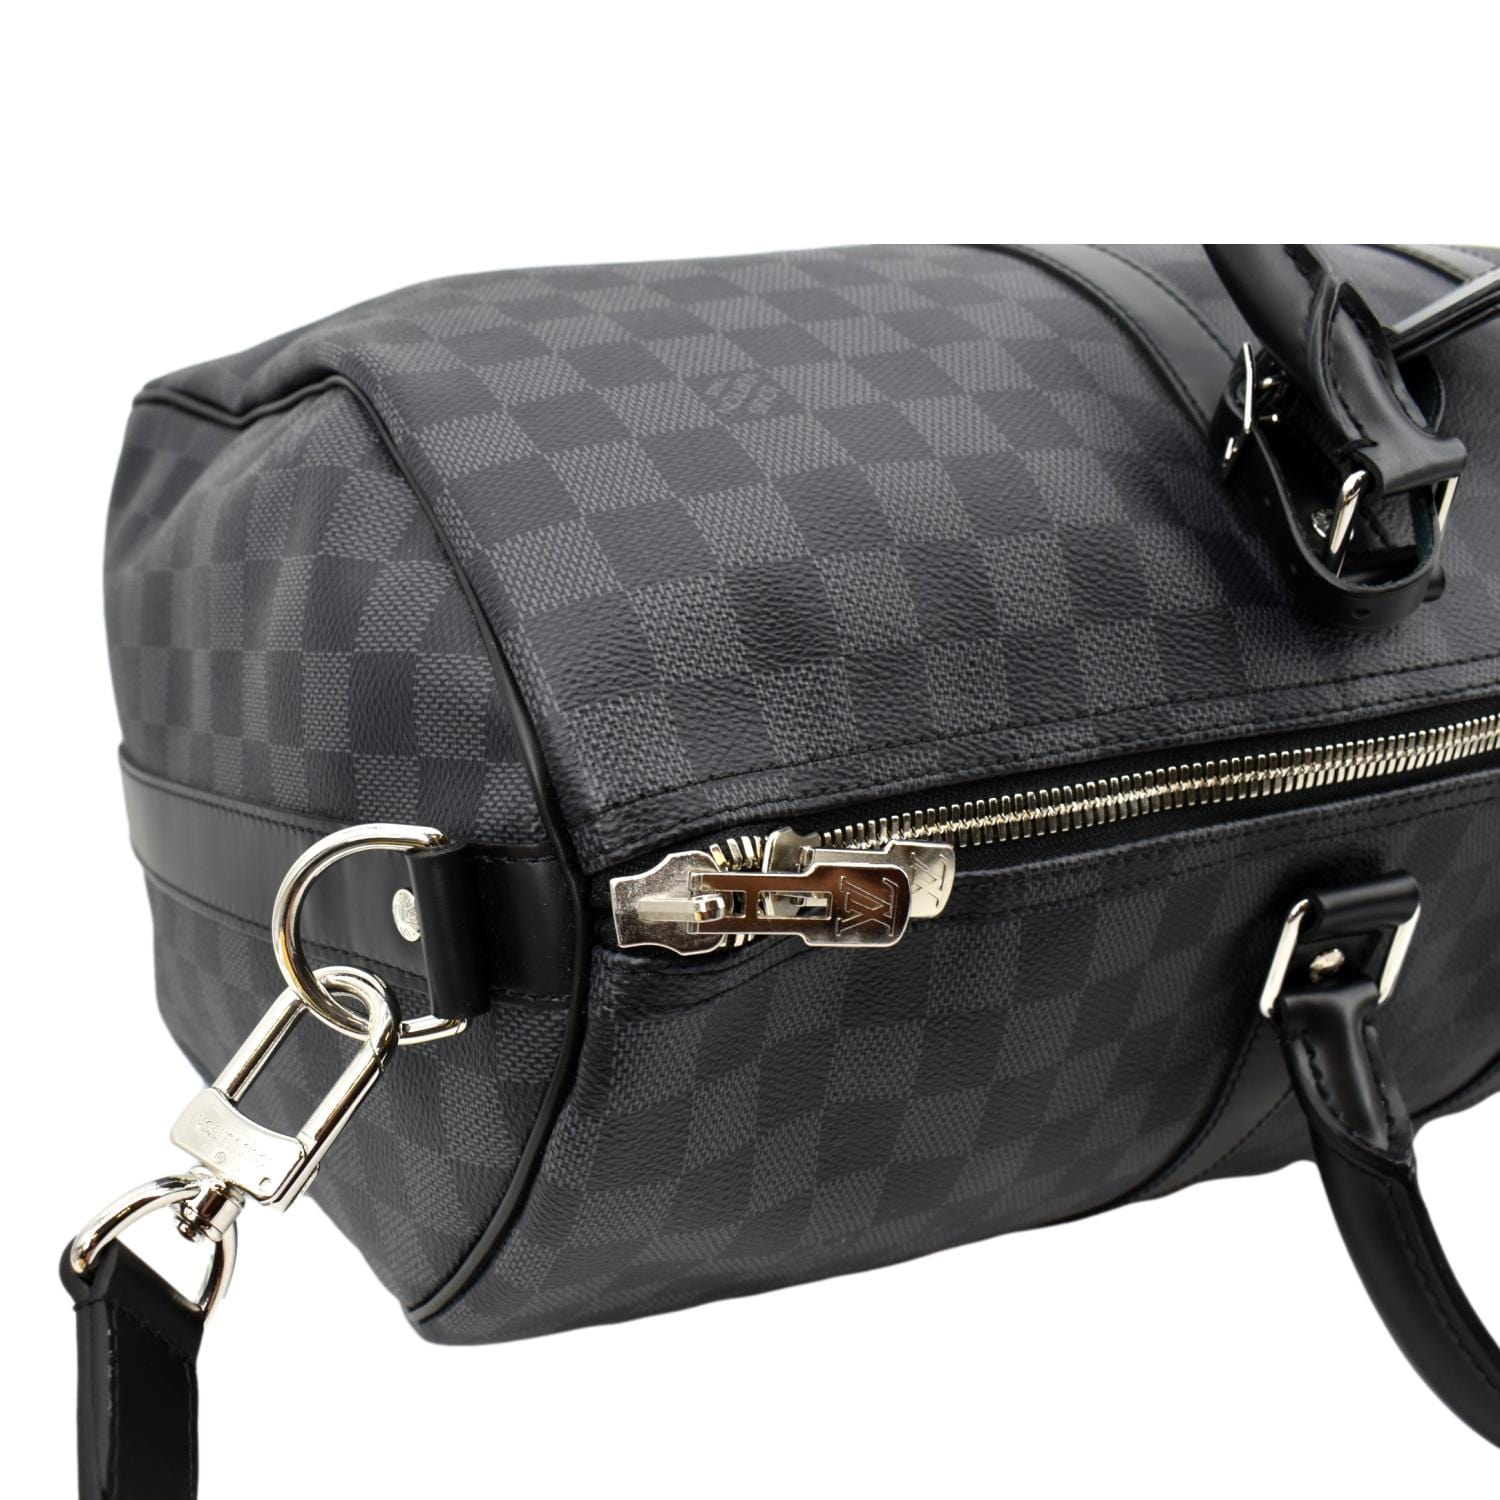 Authentic Louis Vuitton Keepall 45 Bando in Damier Graphite #0240153